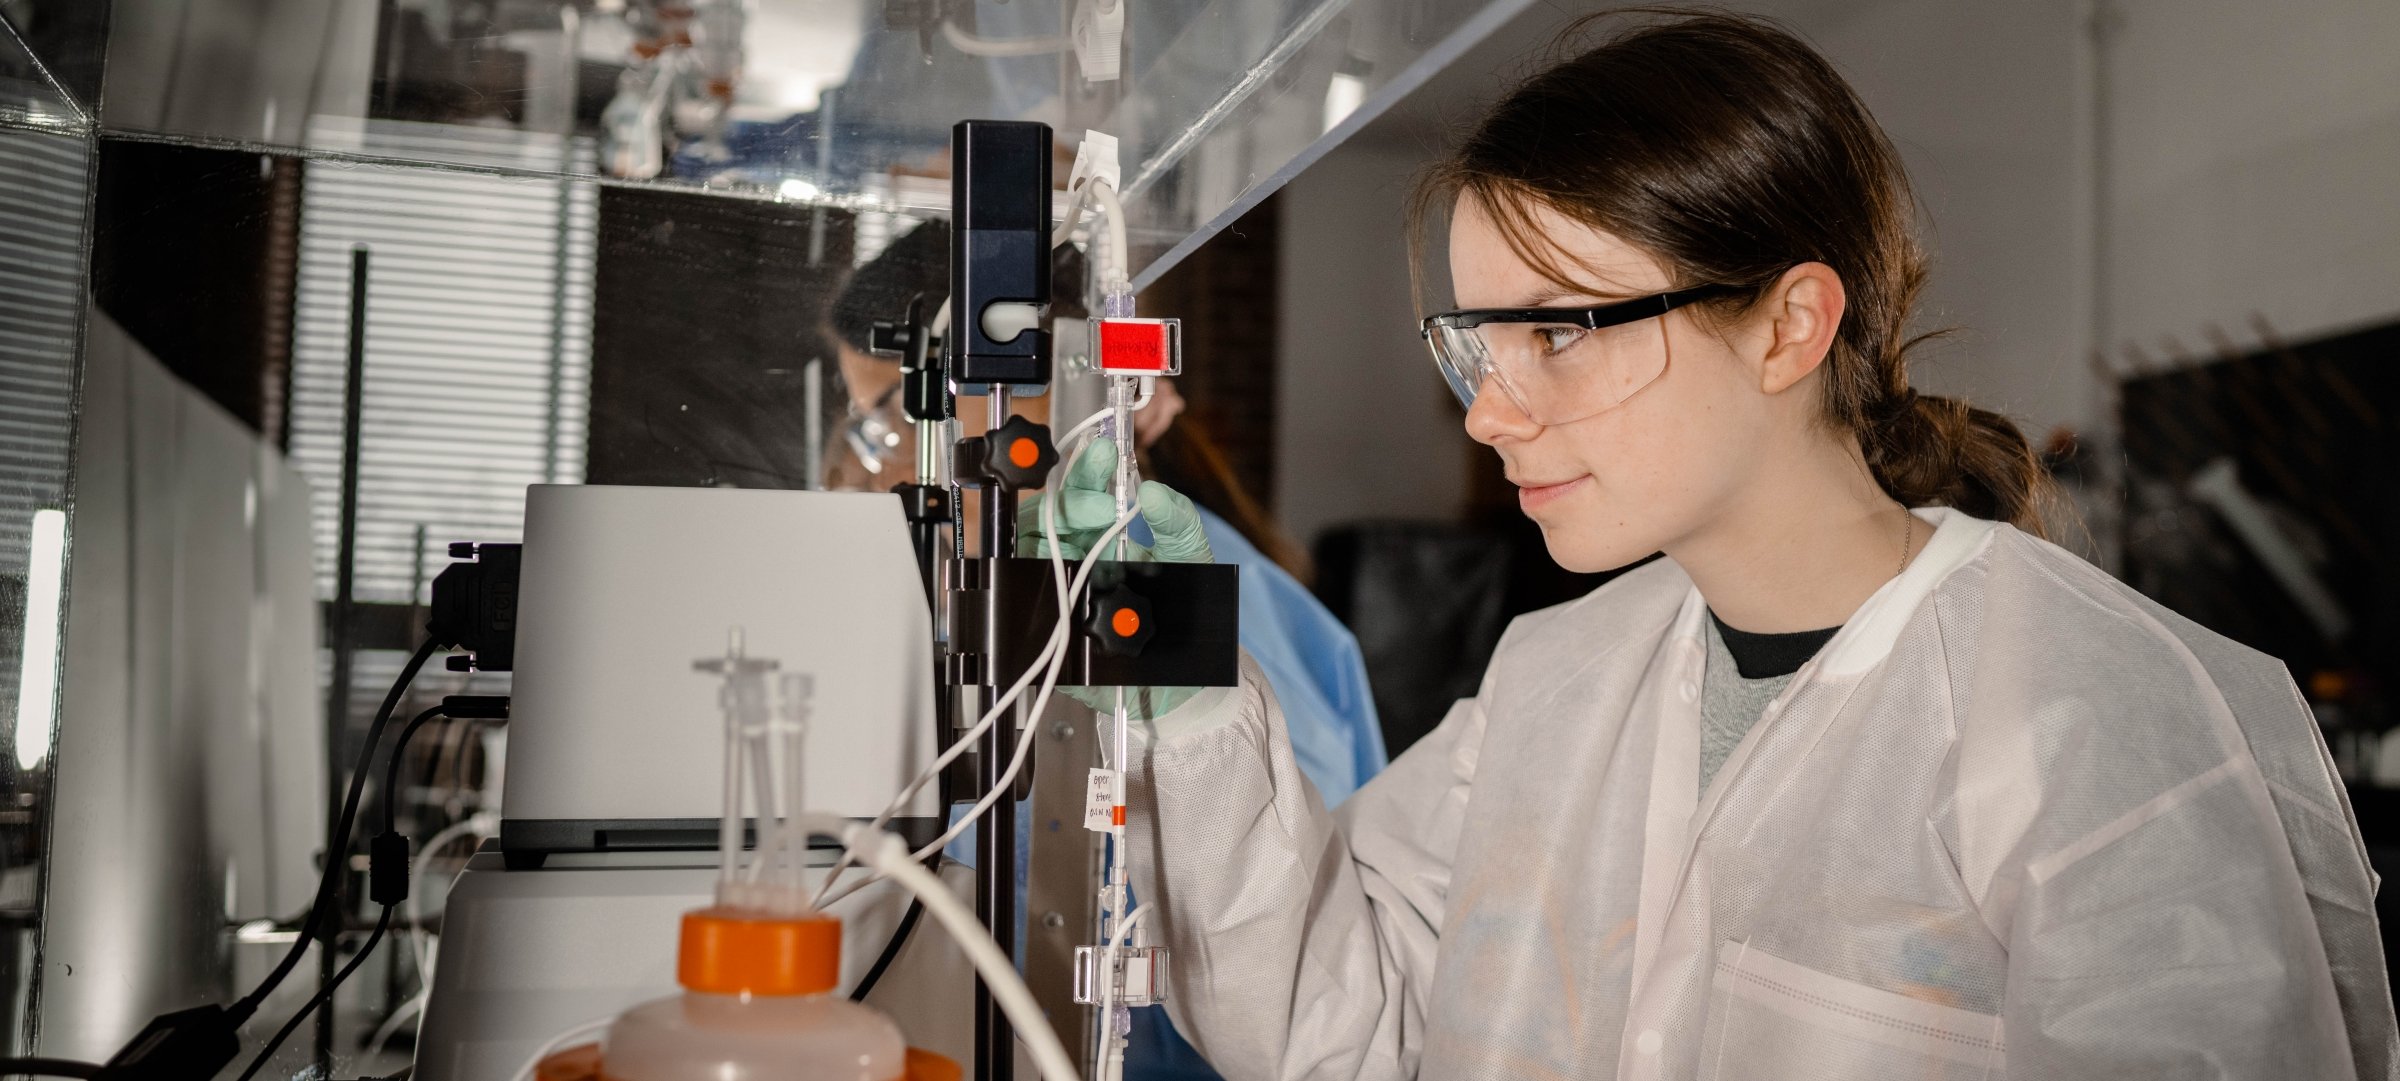 Chemical engineering student working in a lab with lab coat and safety glasses.